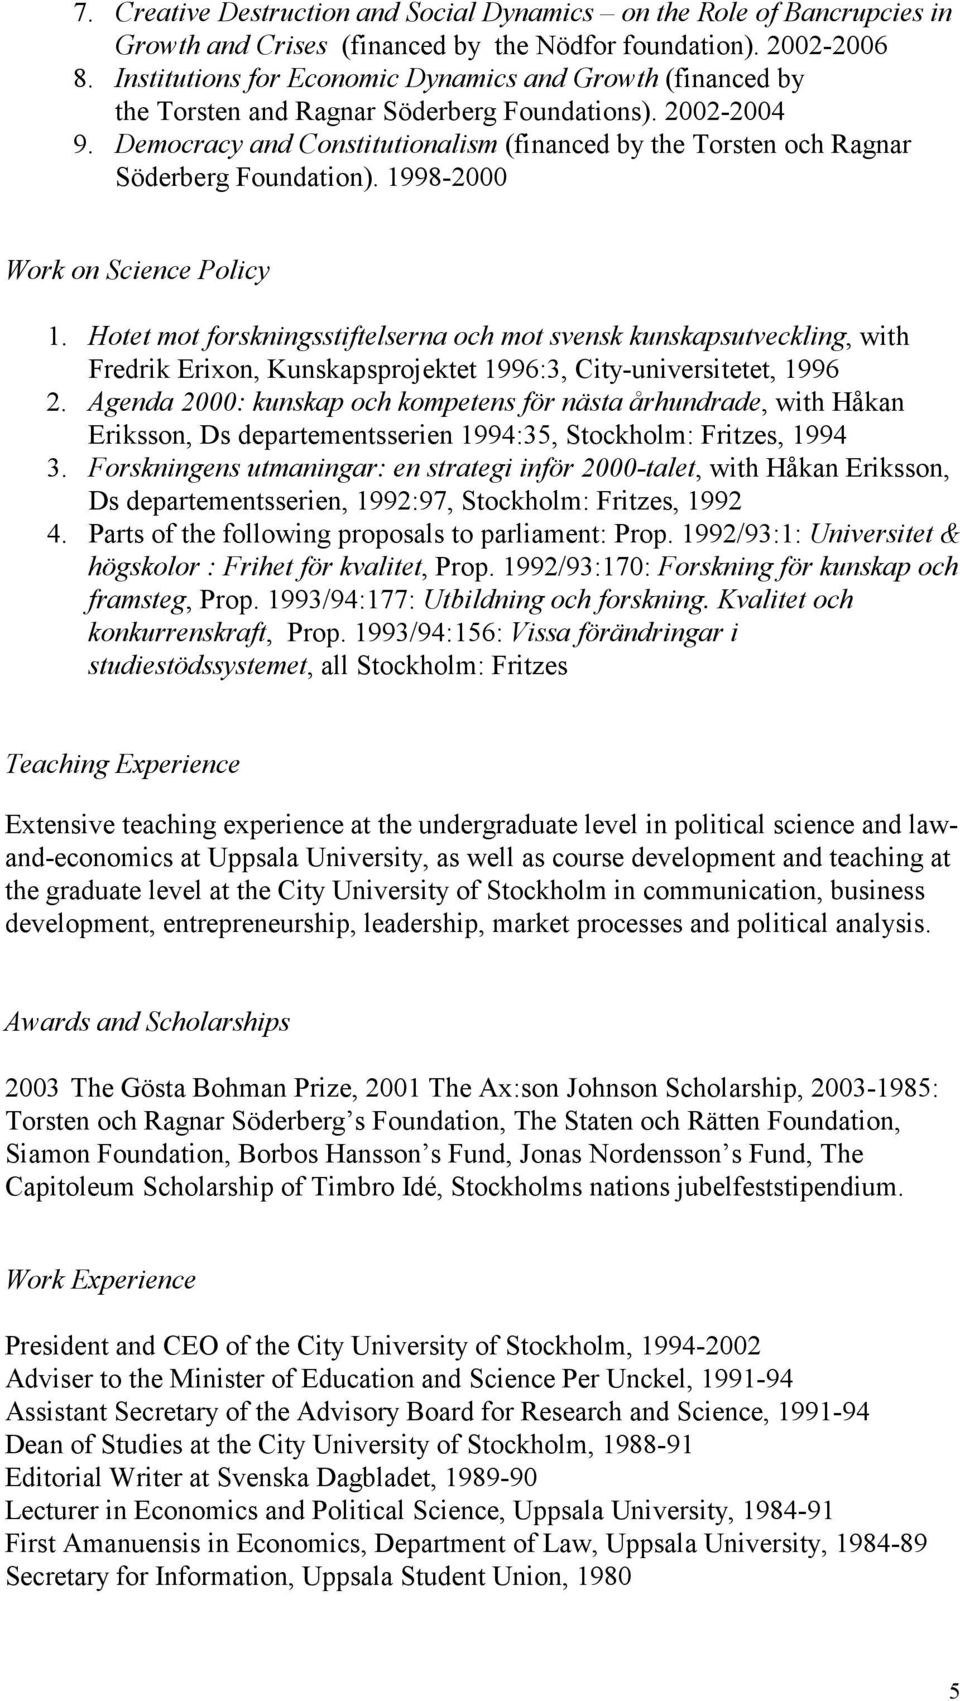 Democracy and Constitutionalism (financed by the Torsten och Ragnar Söderberg Foundation). 1998-2000 Work on Science Policy 1.